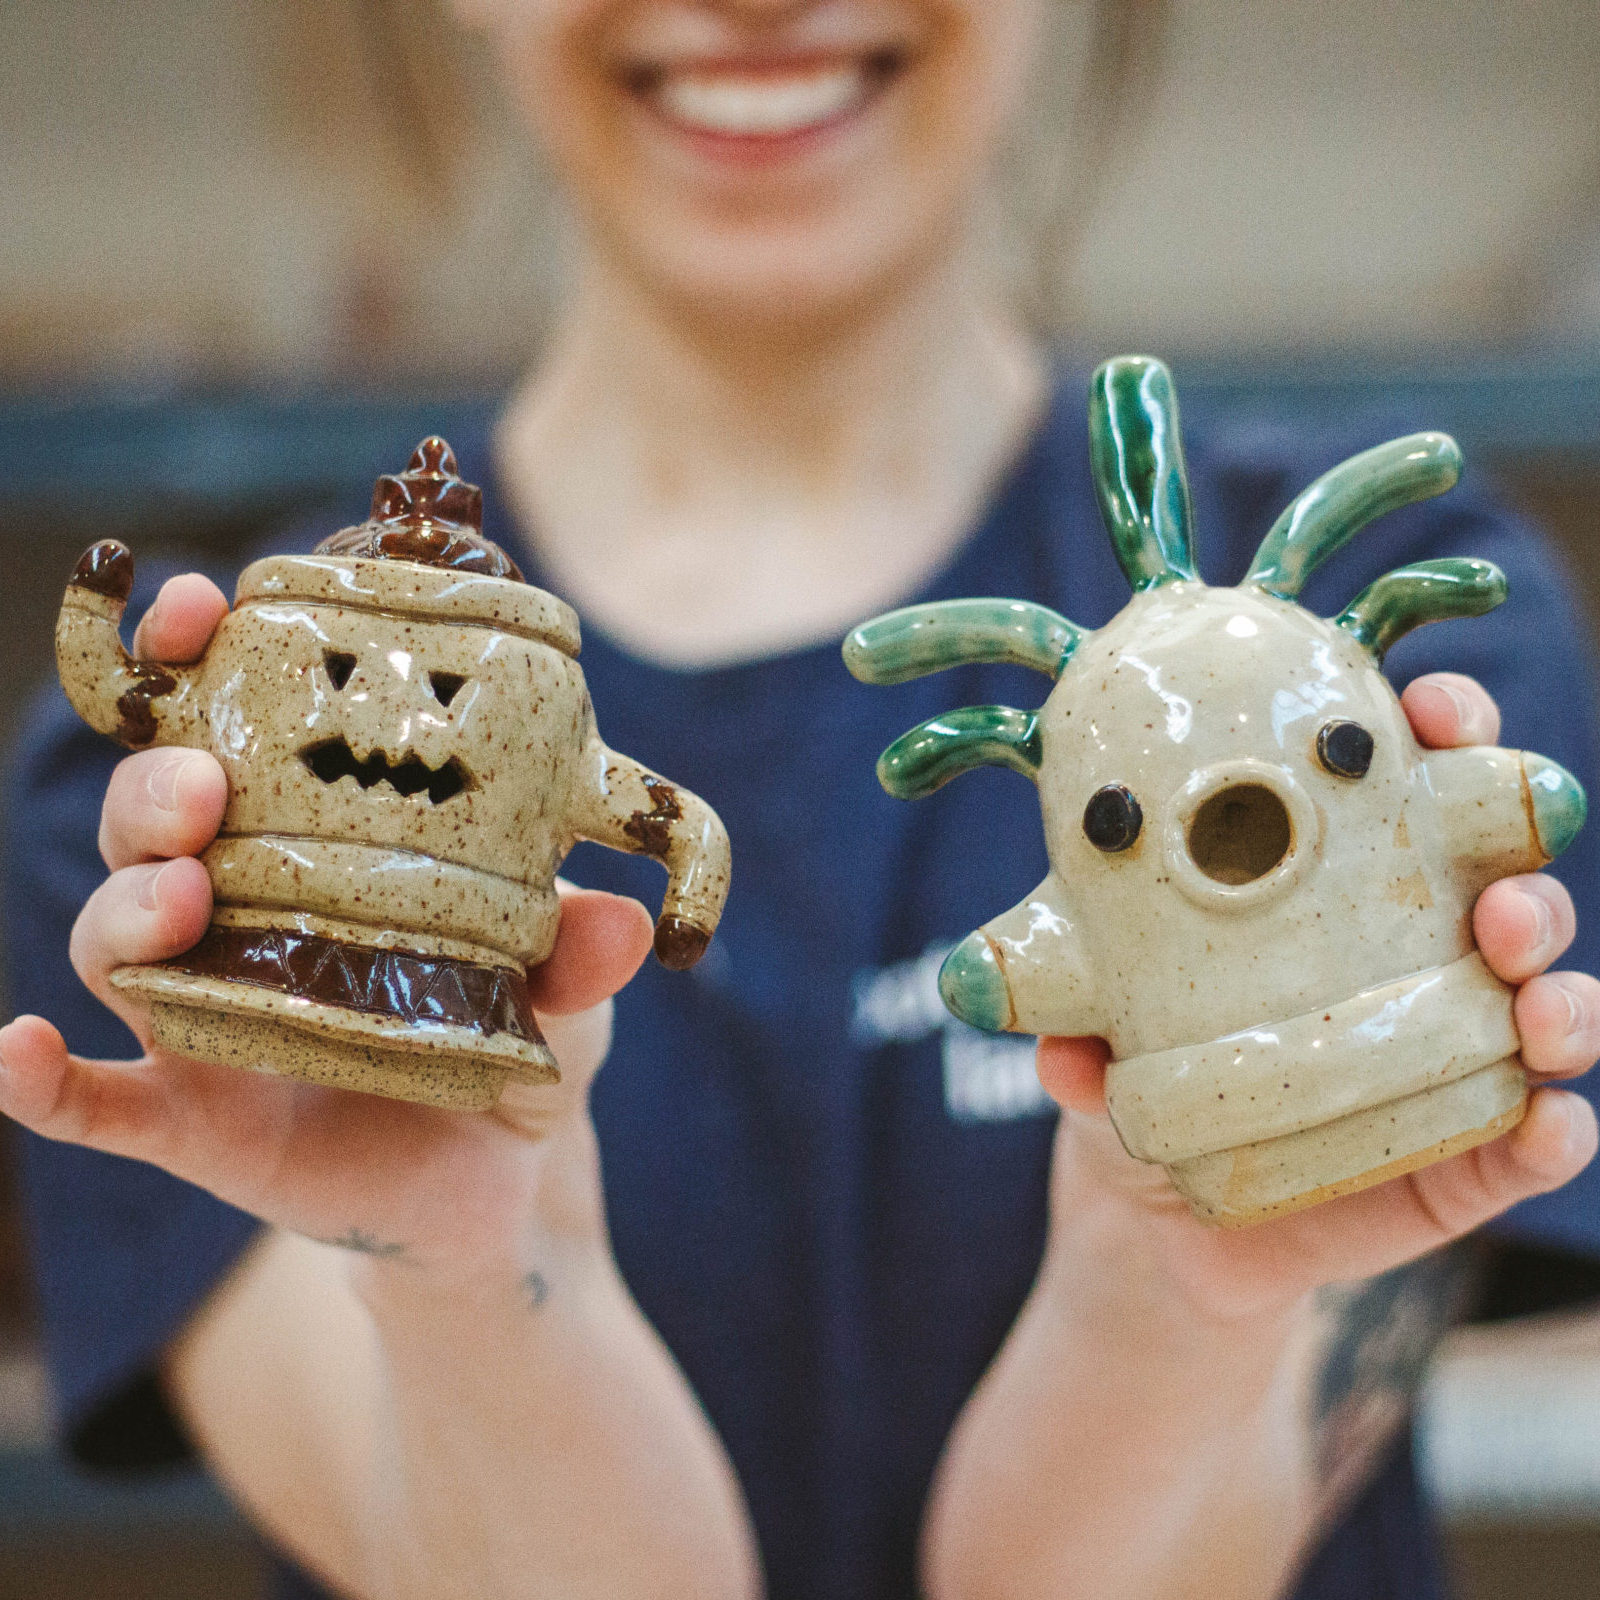 Two fun monsters made out of pottery